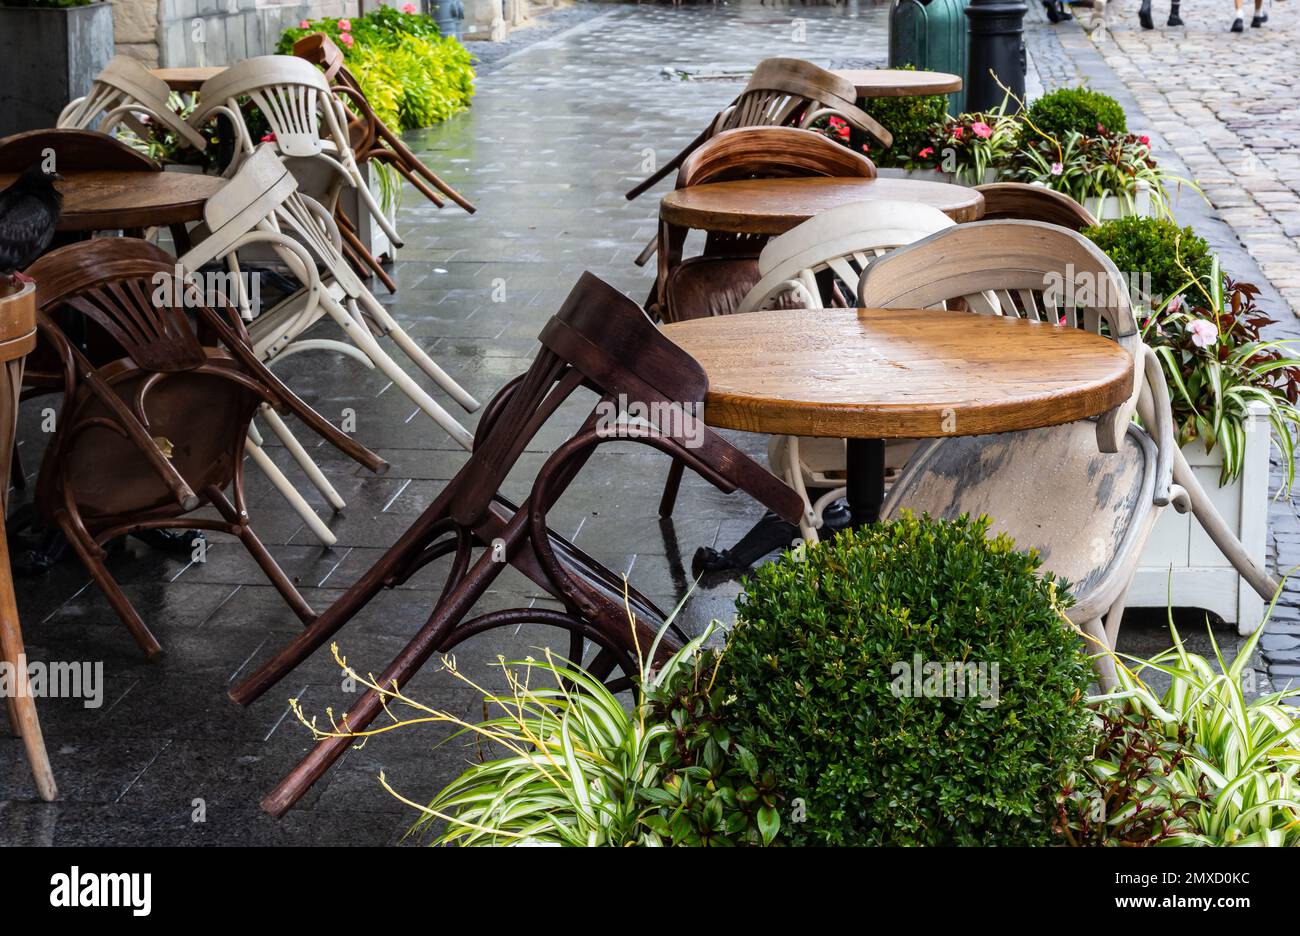 Empty wet wooden table and chairs on terrace of outdoor cafeteria during rain. Street city life in rain. Stock Photo